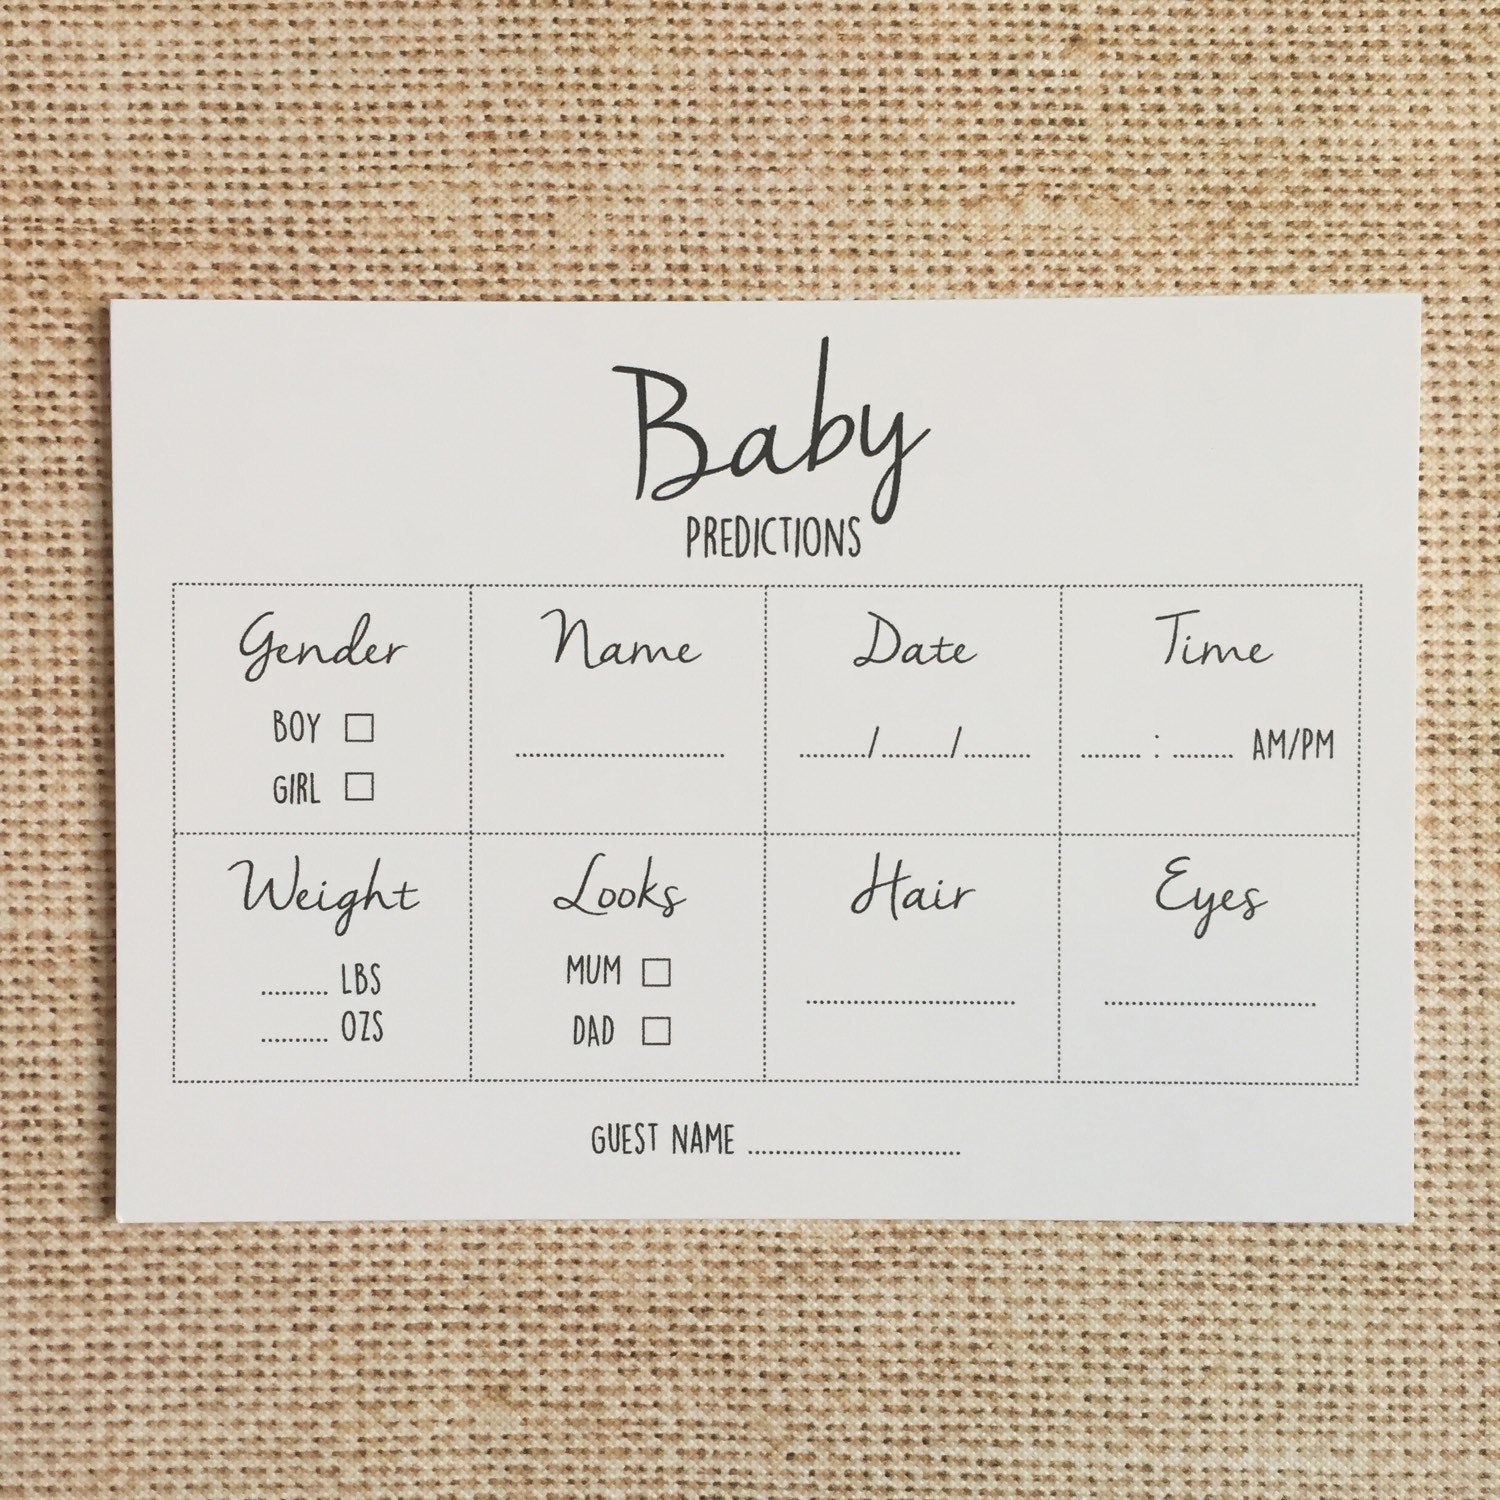 Baby Prediction Cards for Baby Shower Party pk 10